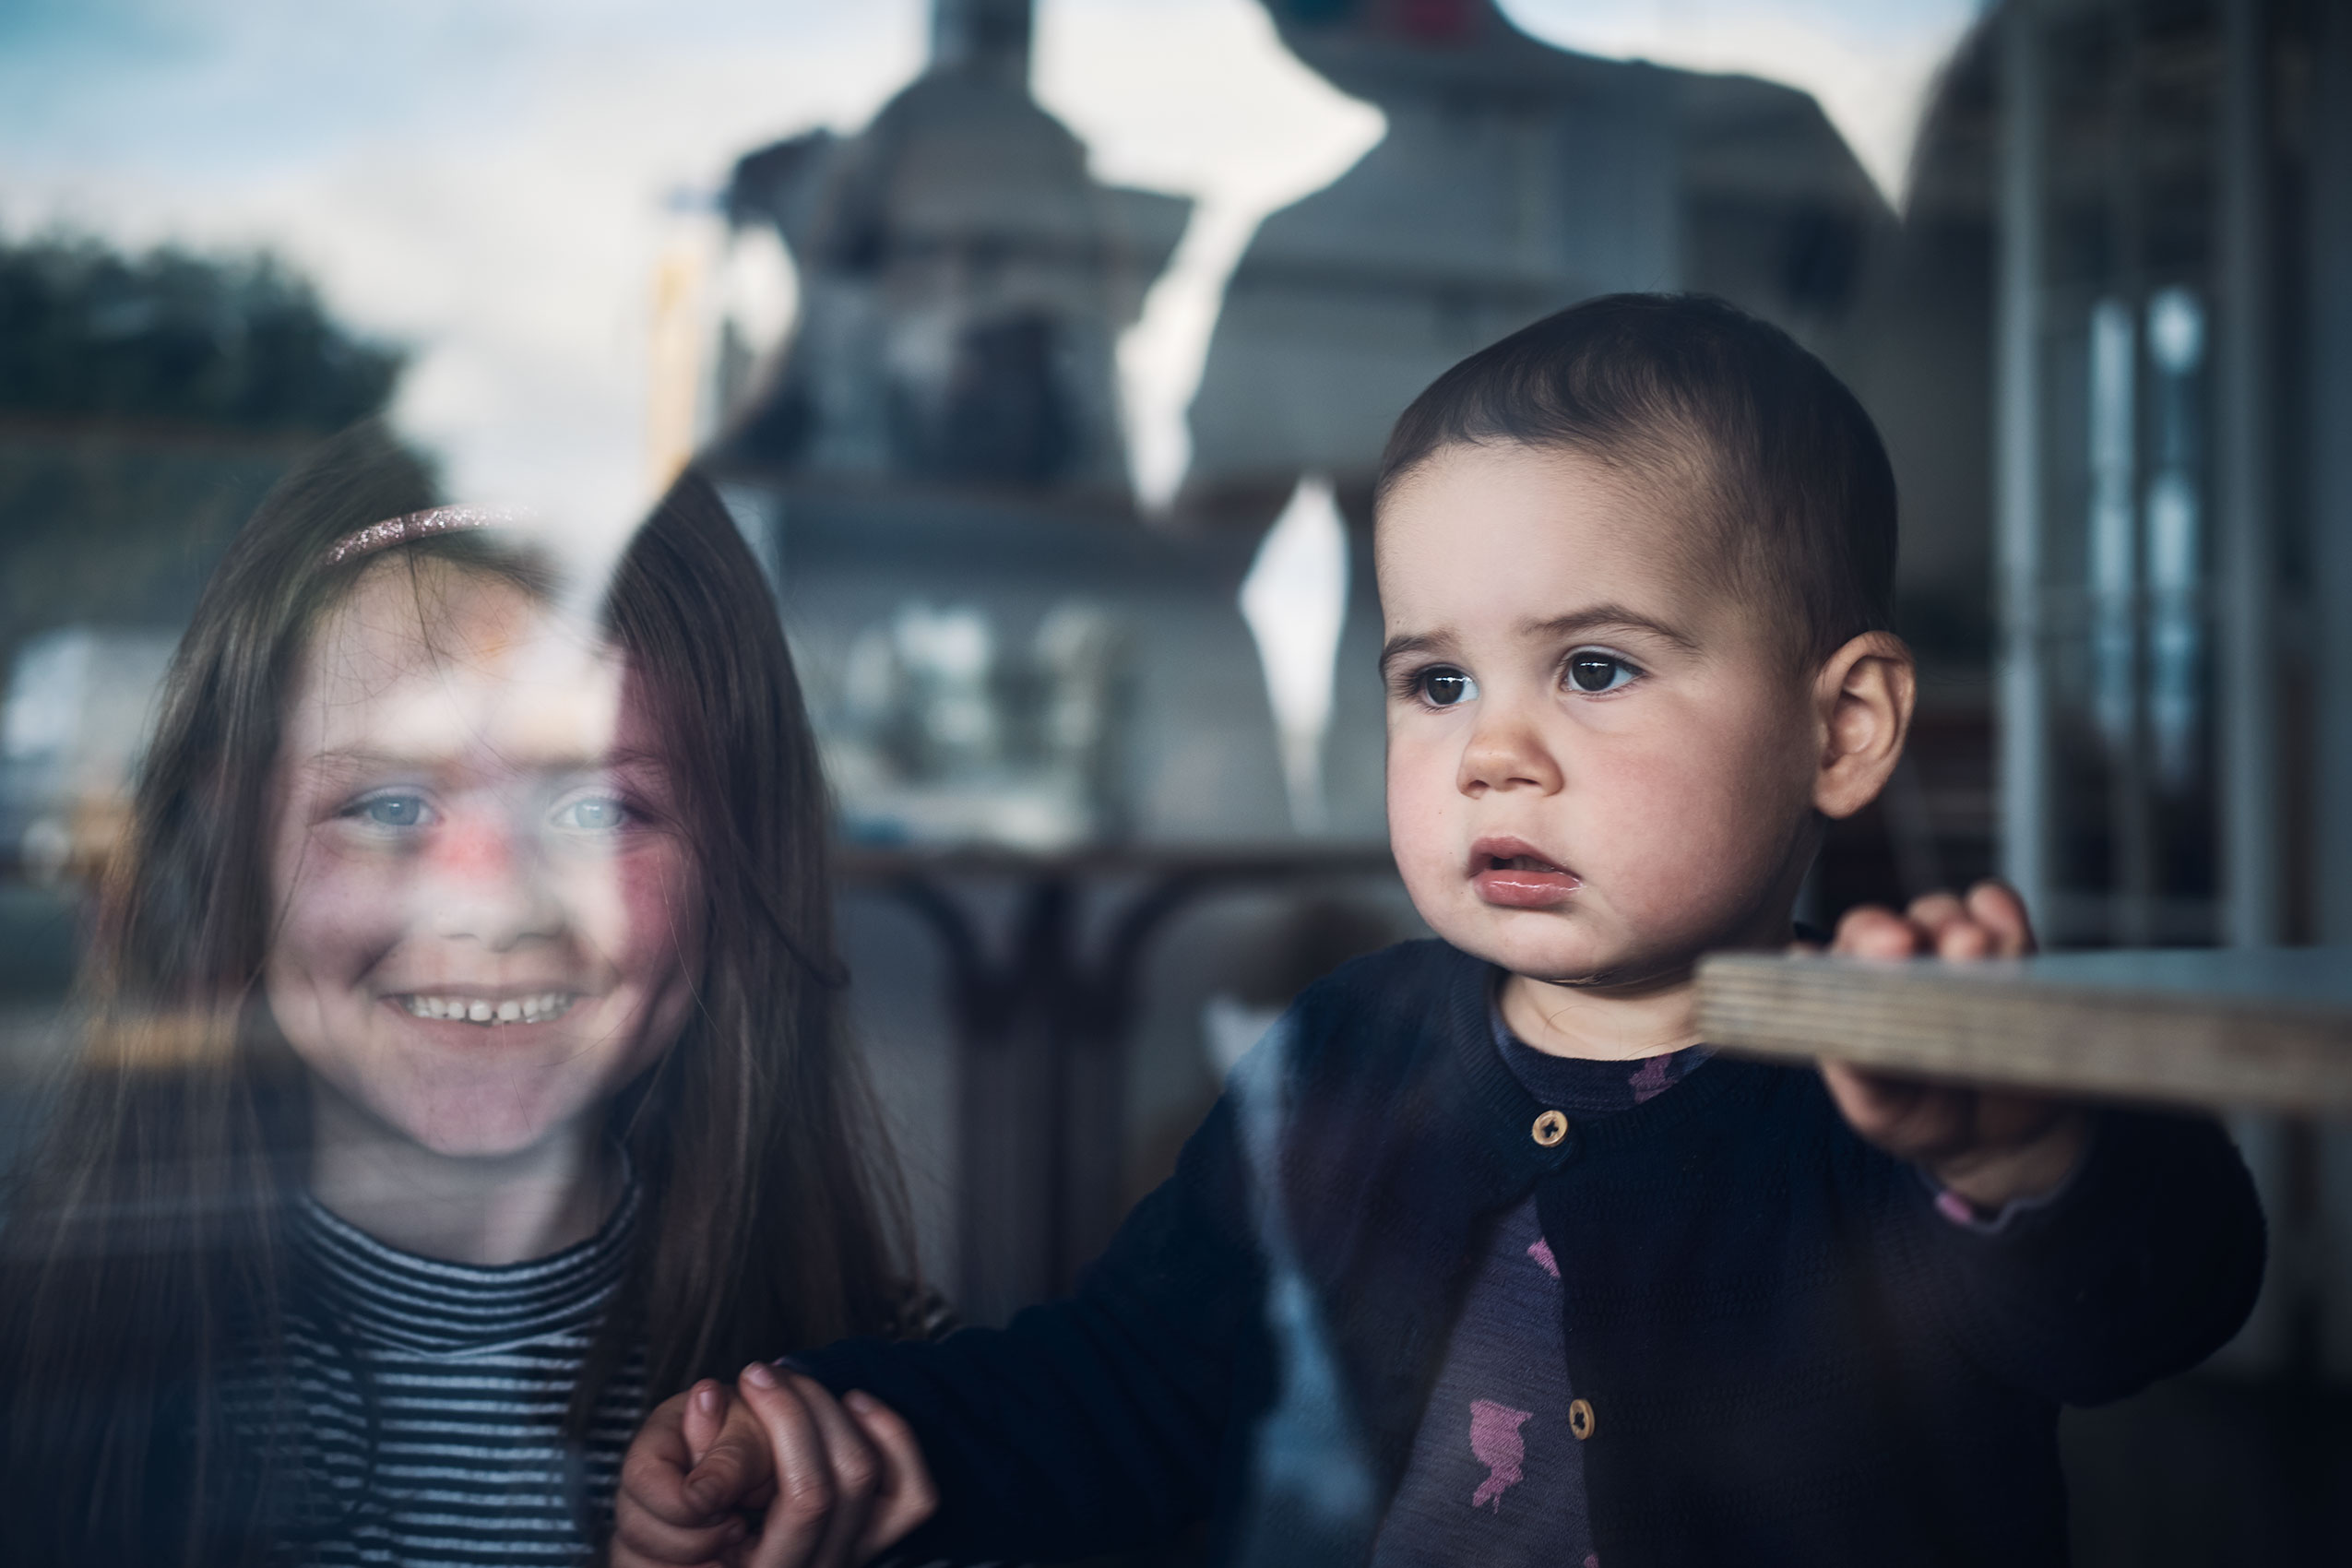 Behind Closed Doors • Family-Owned Peel to Pip Kids in Window • Lifestyle & Portrait Photography